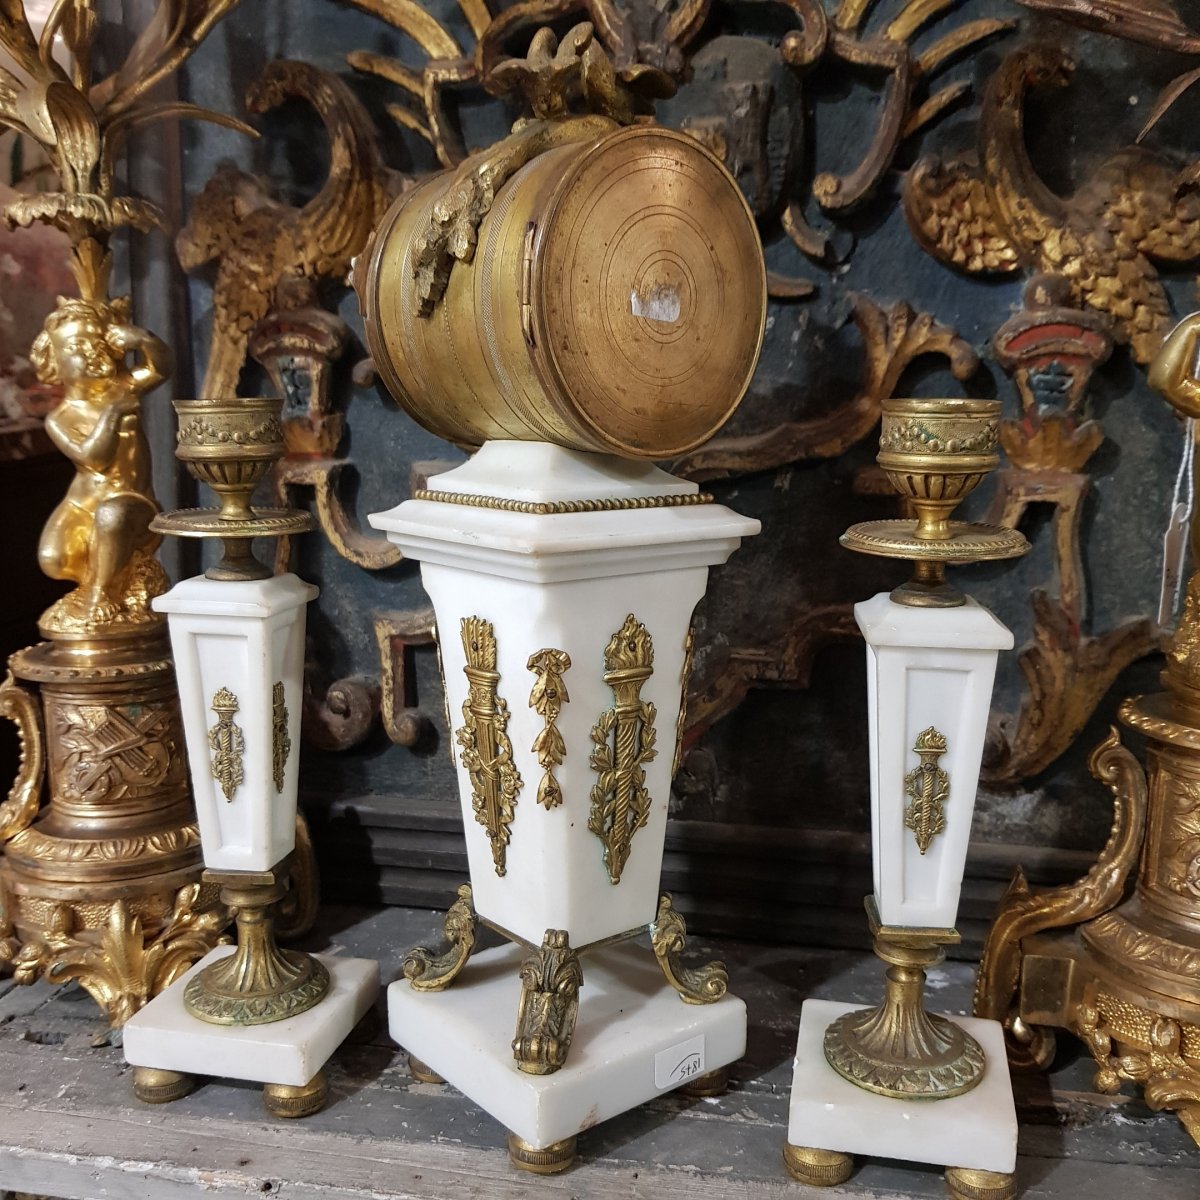 Small Fireplace Or Chest Of Drawers In Marble And Gilt Bronze With Clock And Candlesticks-photo-2